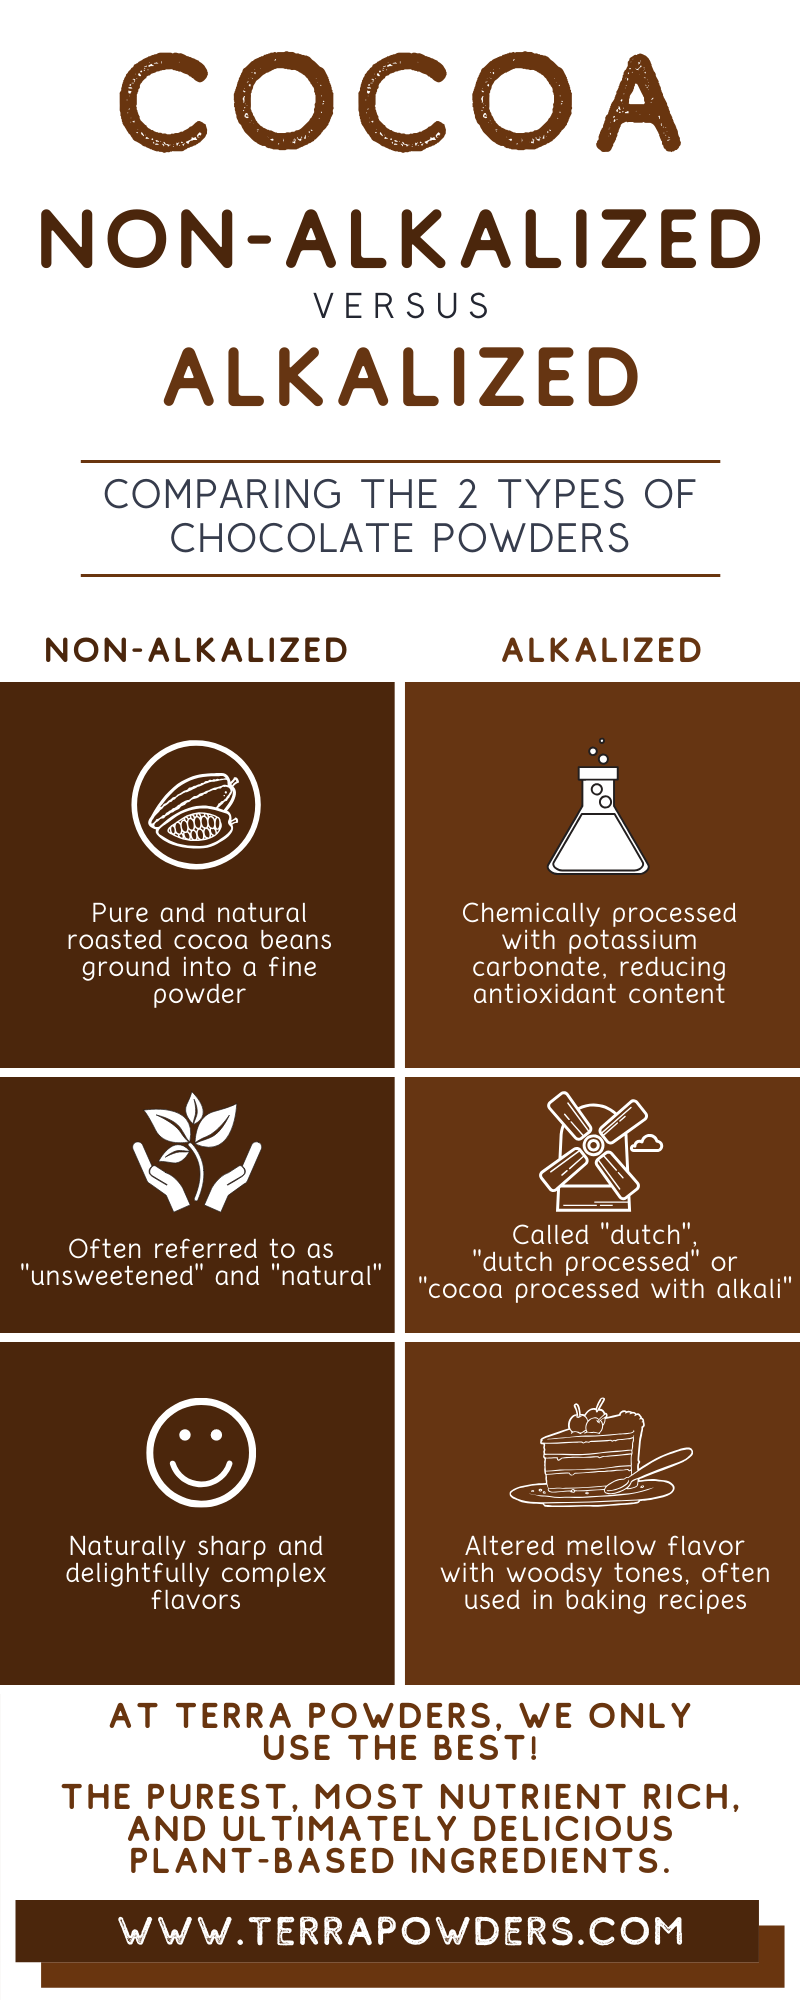 Cocoa Powder Comparison Infographic By Terra Powders Nutrient Rich Clean Food Power